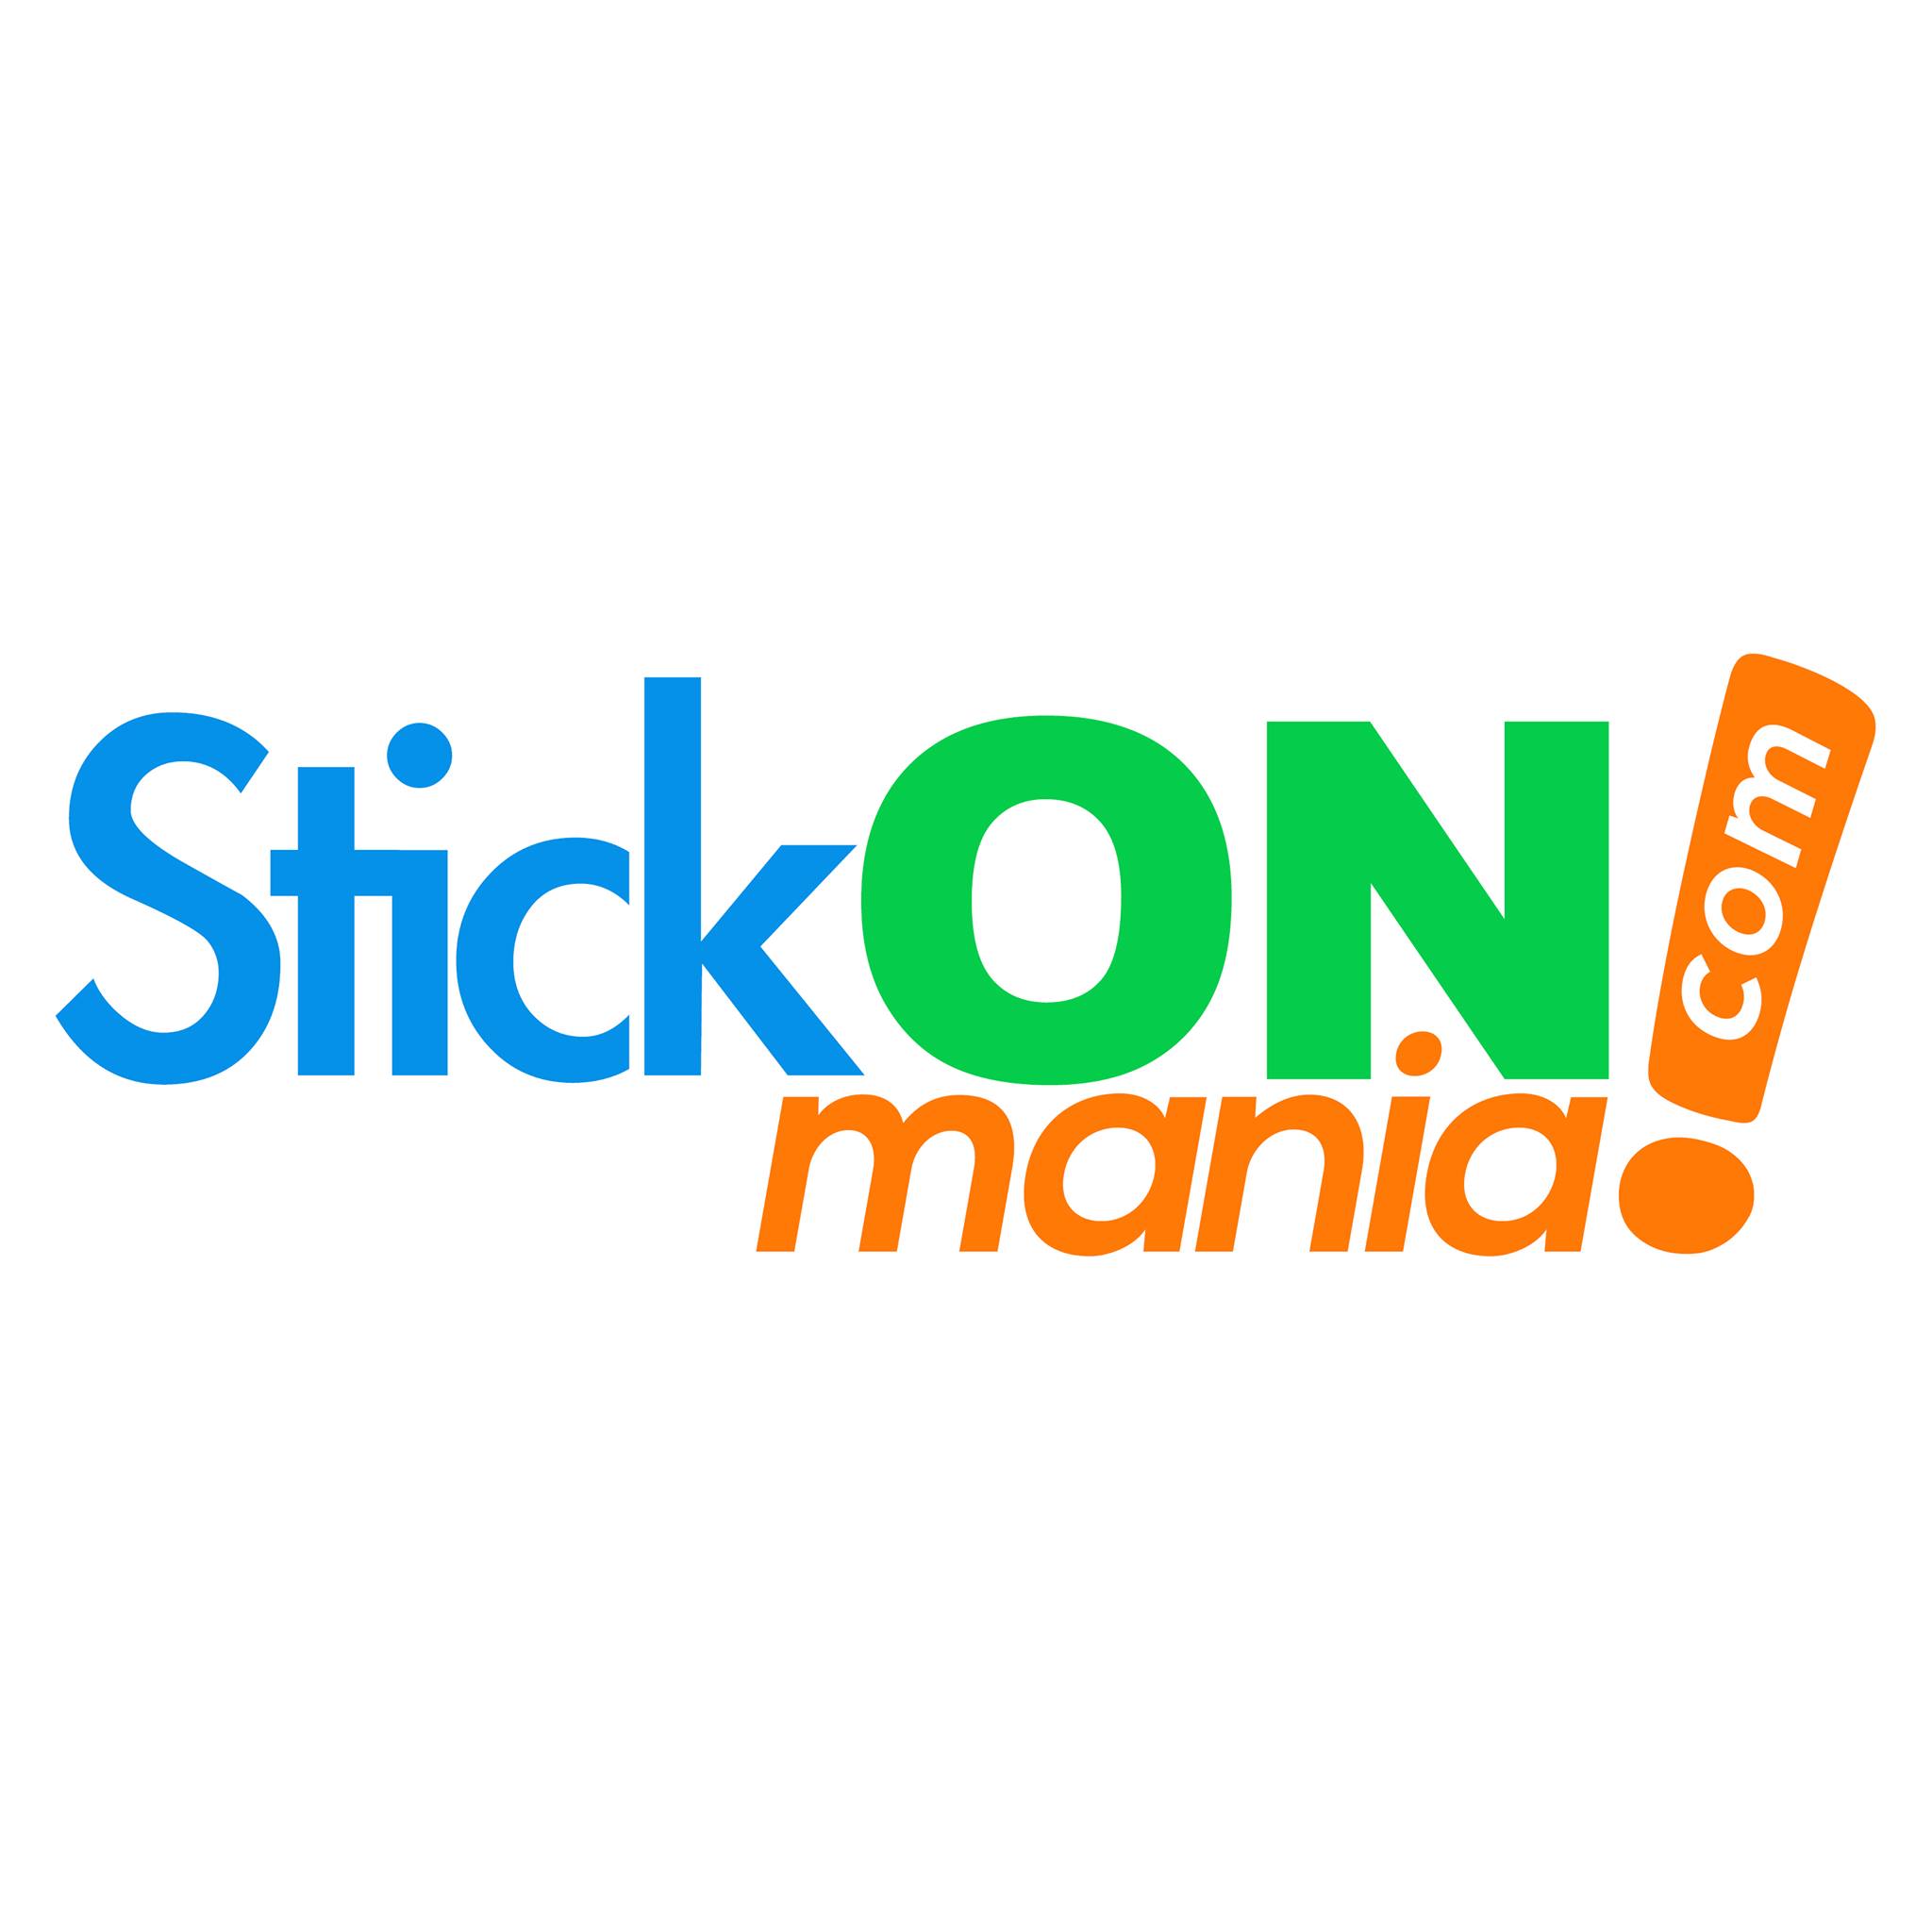 StickONmania.com | Shop for Wall Art and Vinyl Decal Stickers